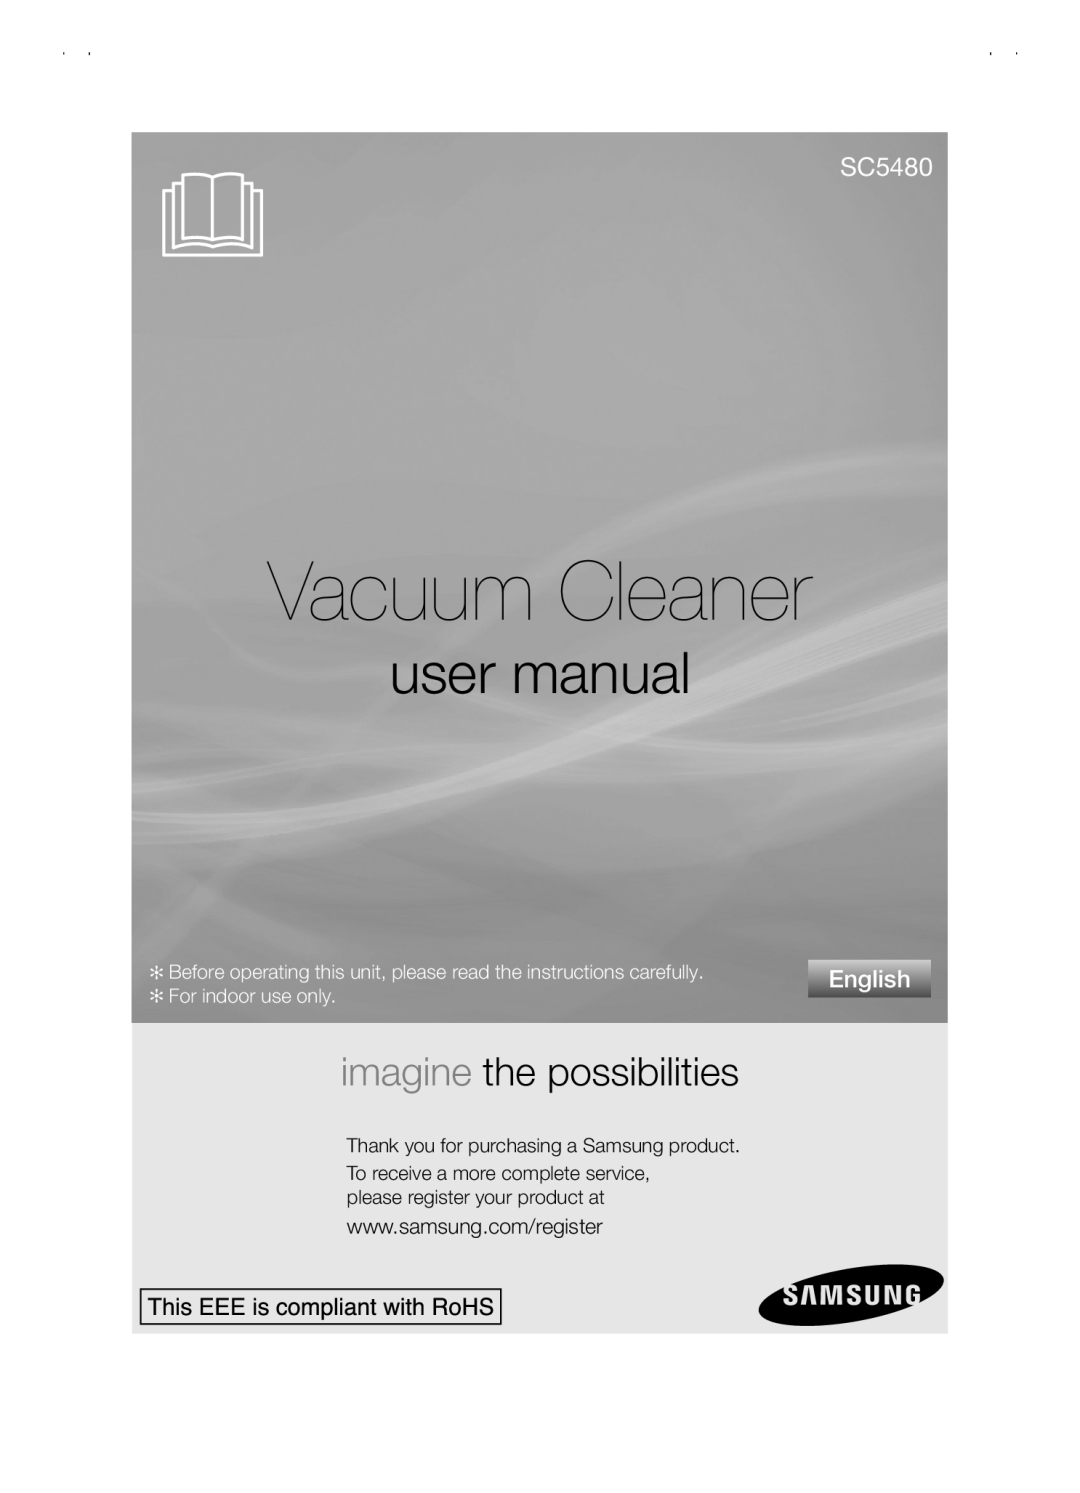 Samsung VCC5480V3B/XTR Vacuum Cleaner, user manual, English, For indoor use only, imagine the possibilities, SC5480 